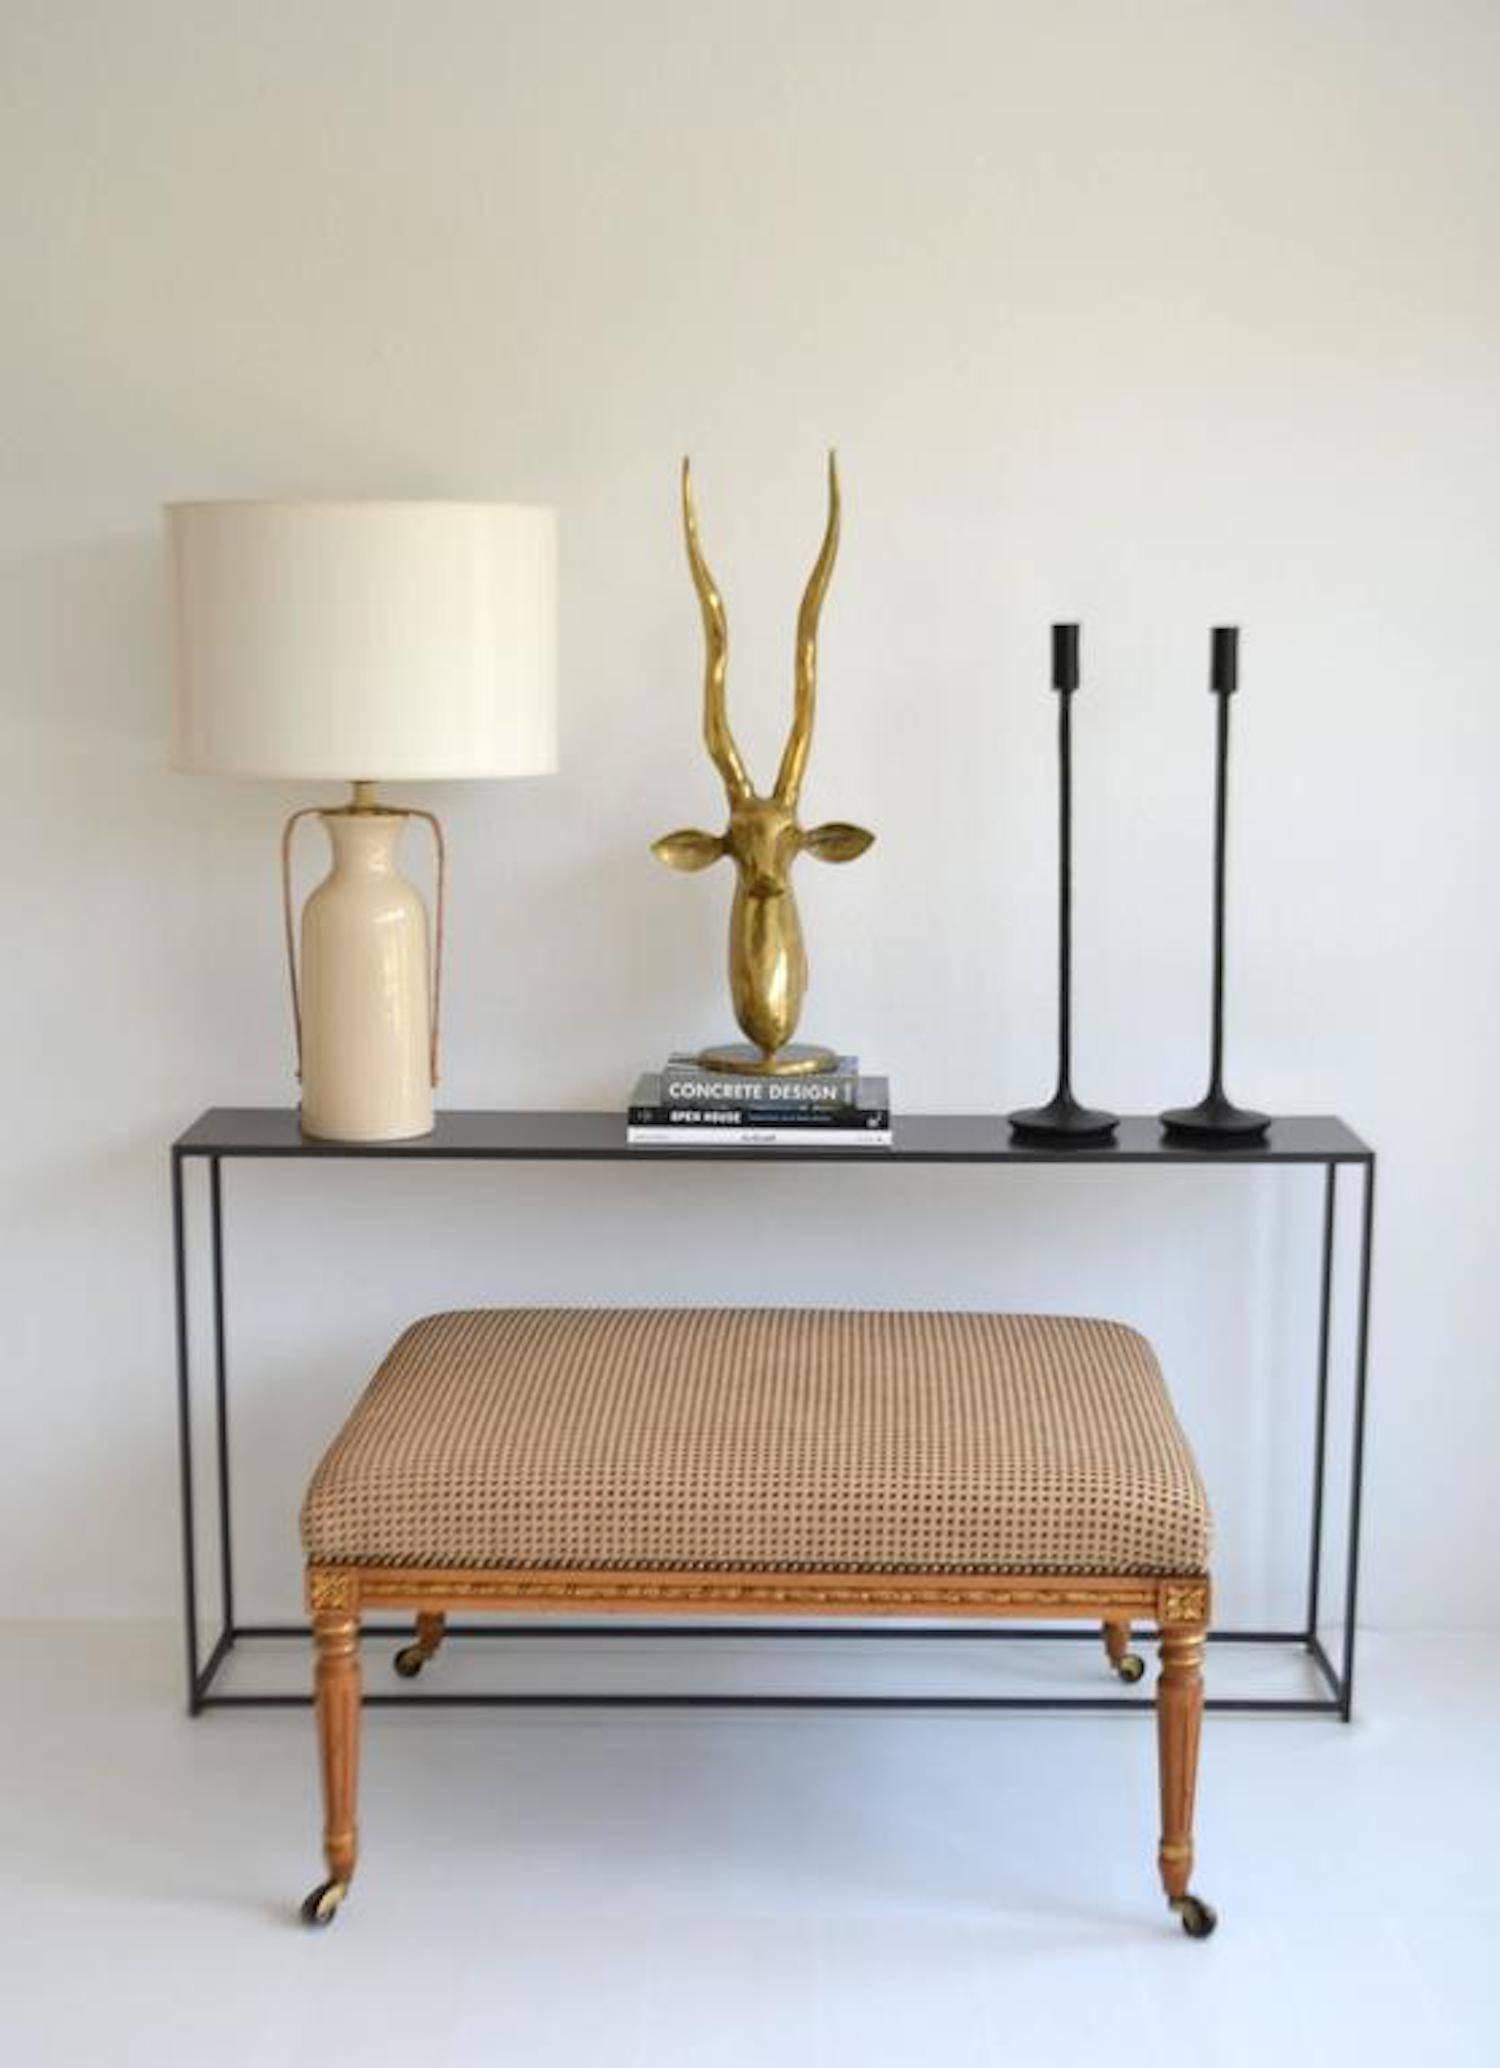 Striking midcentury cream glazed jar form table lamp, circa 1960s. This sculptural lamp is accented with rattan and wired with brass fittings.
Shade not included.
Measurements:
Overall 29